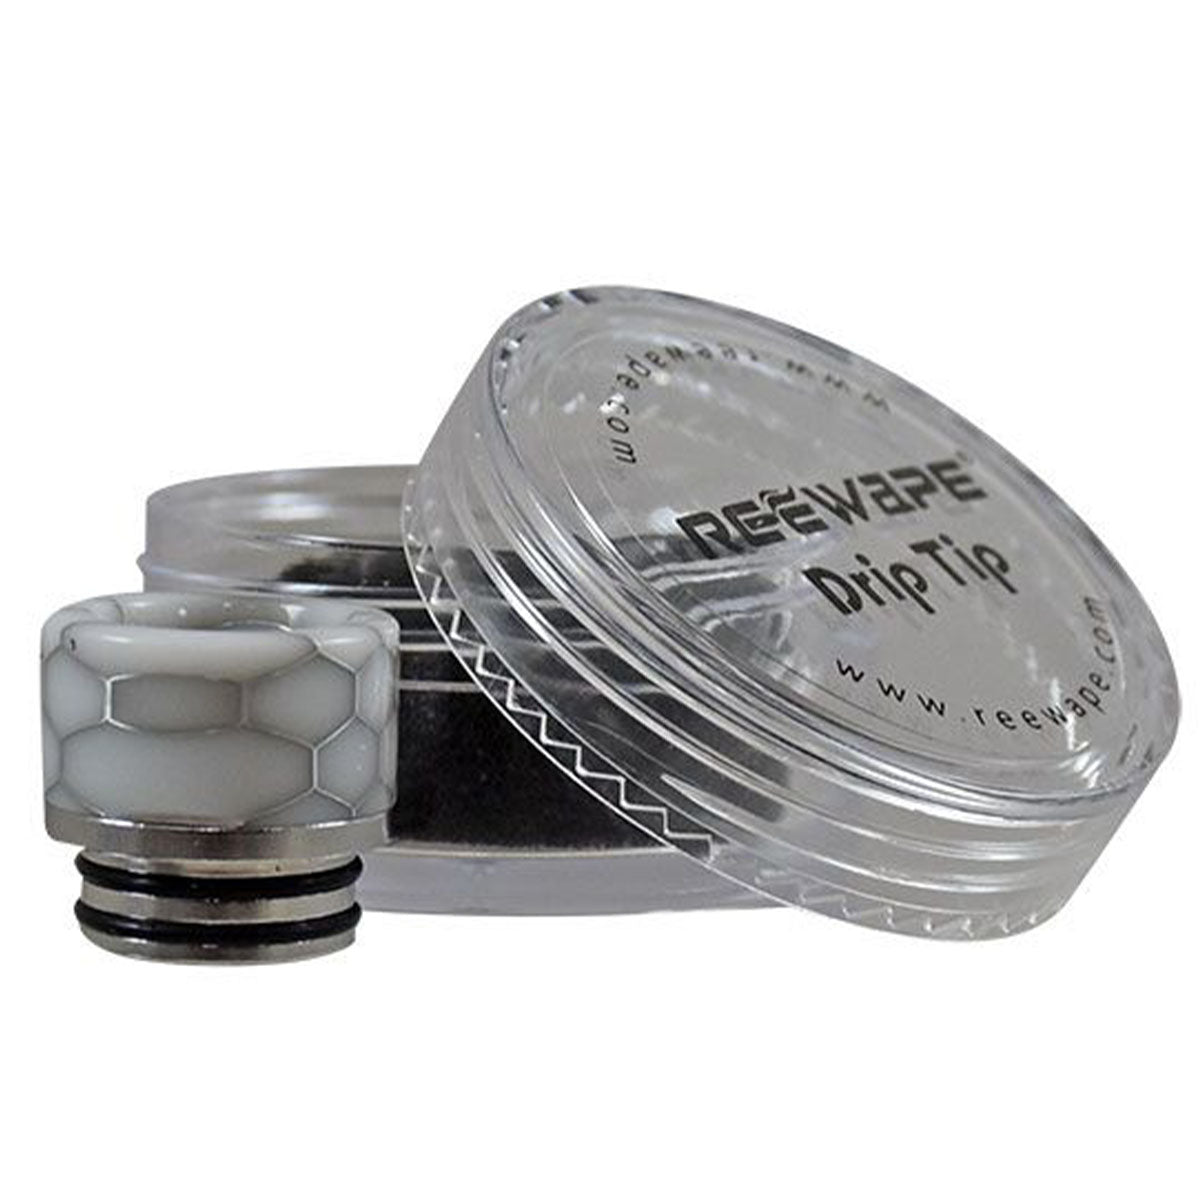 Replacement 810 Wide Bore Resin Drip Tip By Reewape - Prime Vapes UK